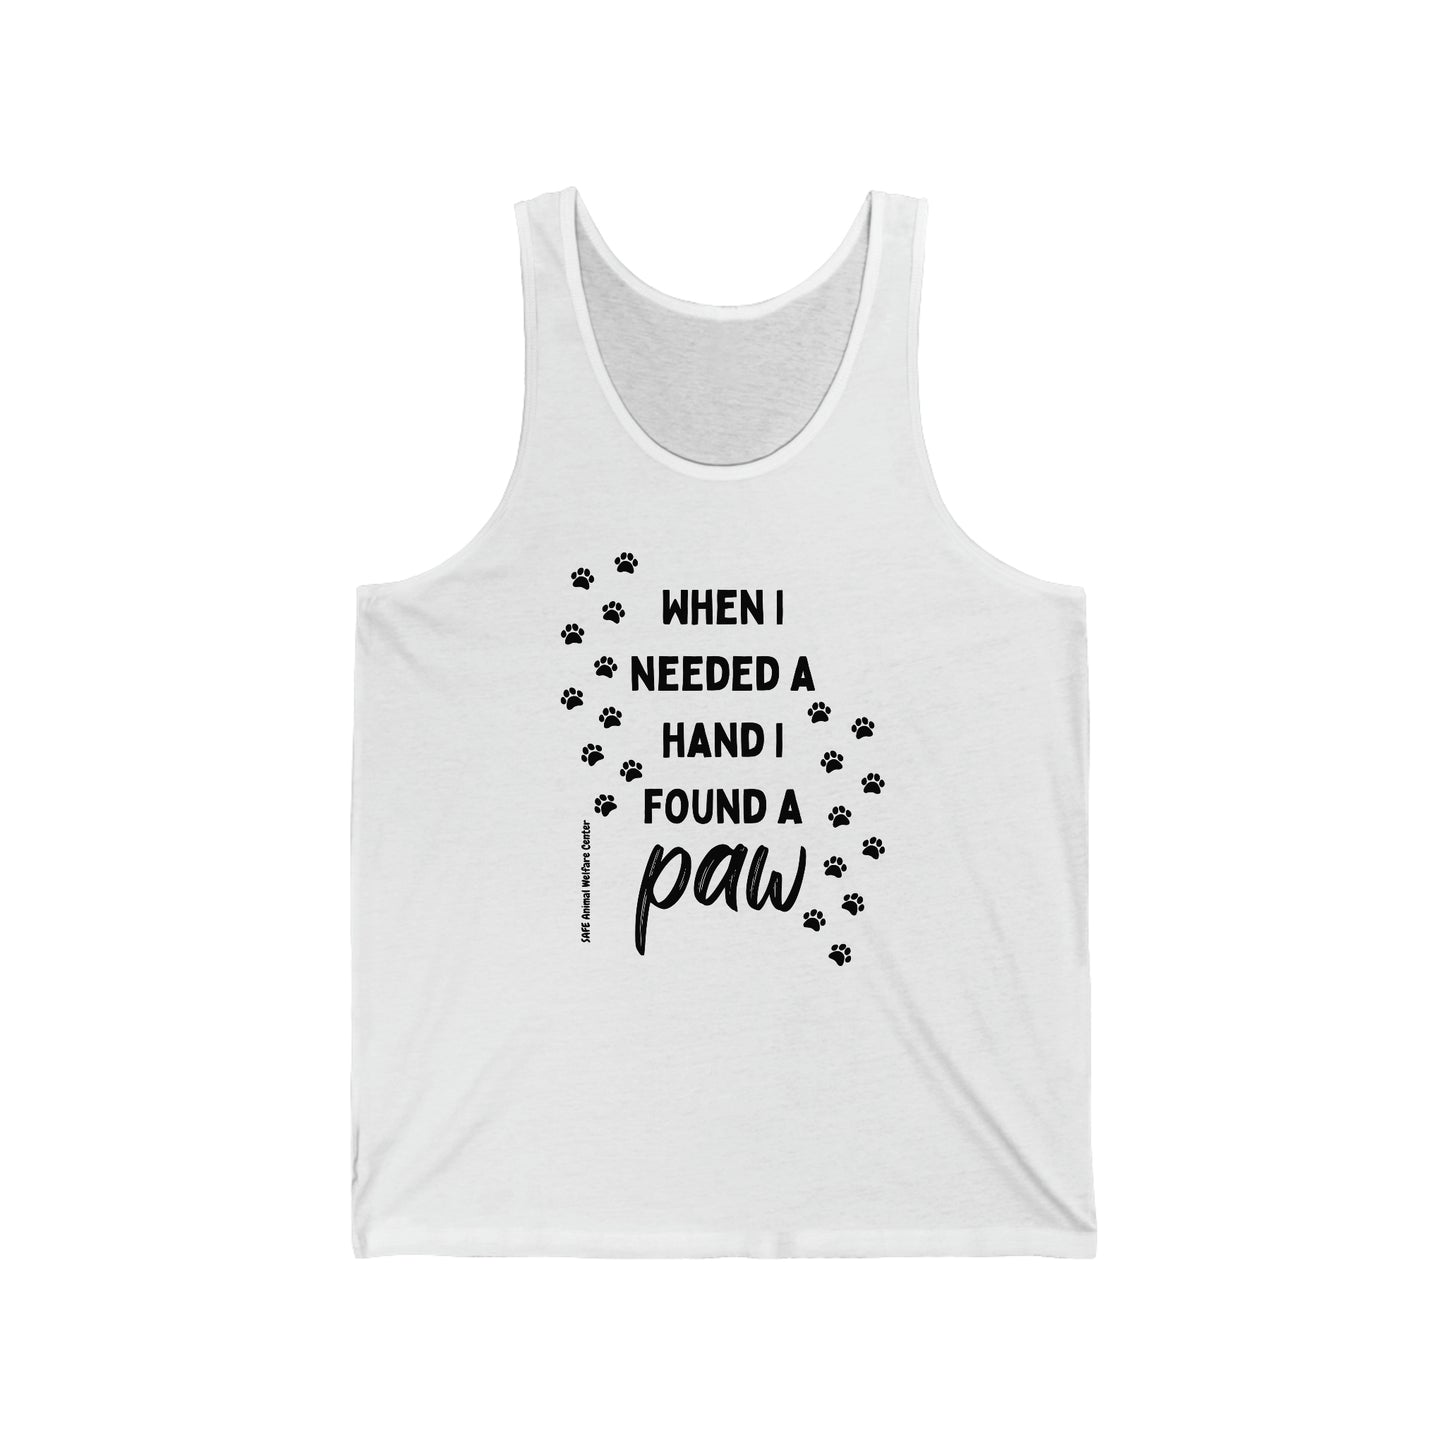 Do you need a paw? Unisex Jersey Tank